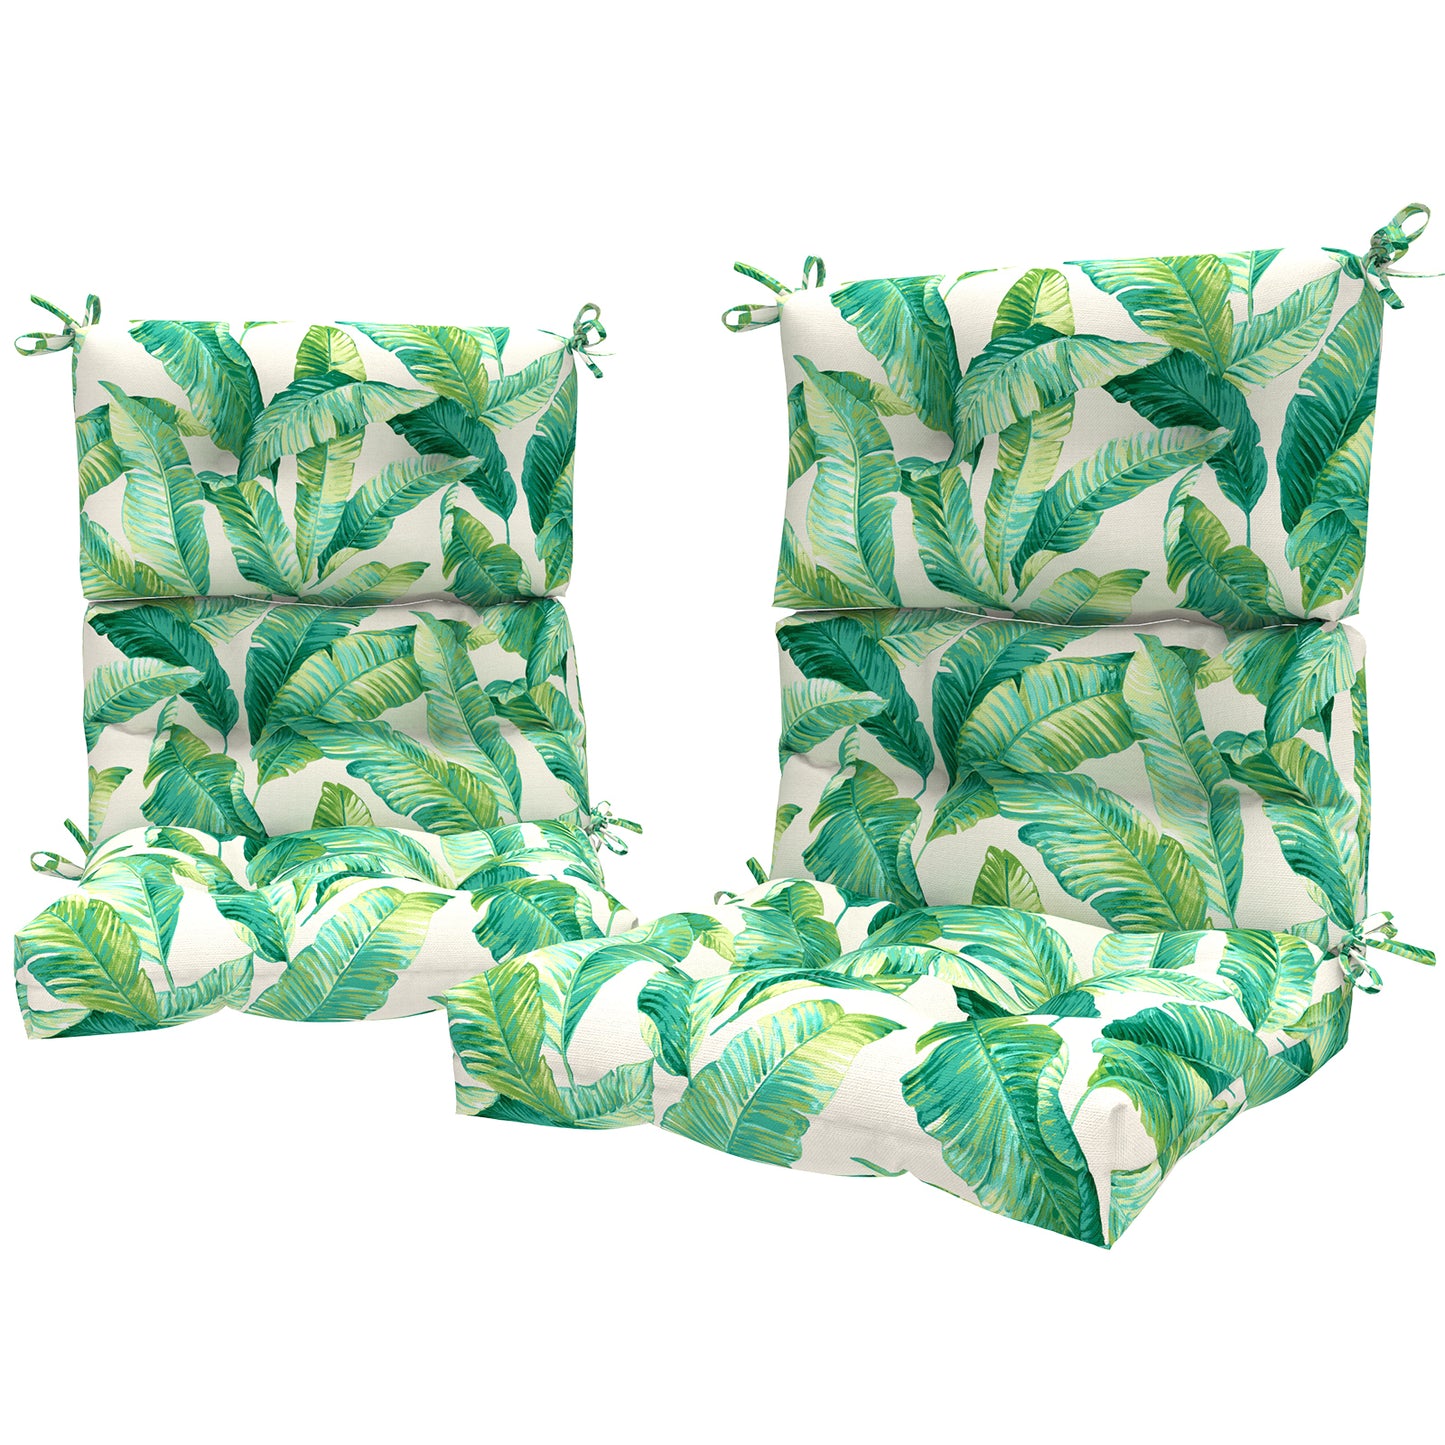 Melody Elephant Outdoor Tufted High Back Chair Cushions, Water Resistant Rocking Seat Chair Cushions 2 Pack, Adirondack Cushions for Patio Home Garden, 22" W x 20" D,Swaying Palms